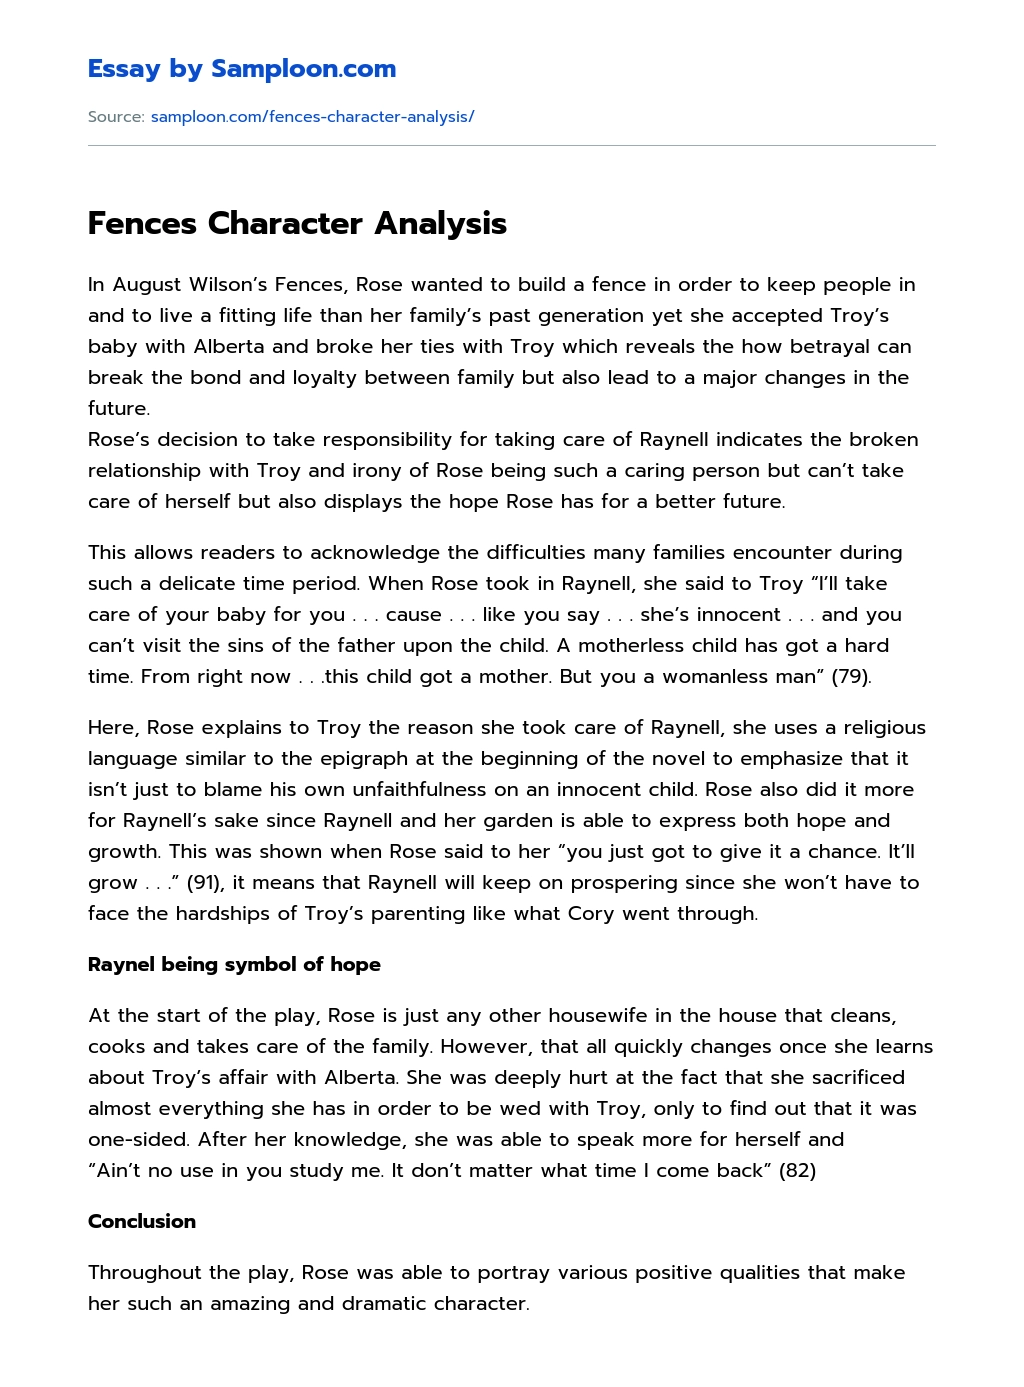 Fences Character Analysis essay